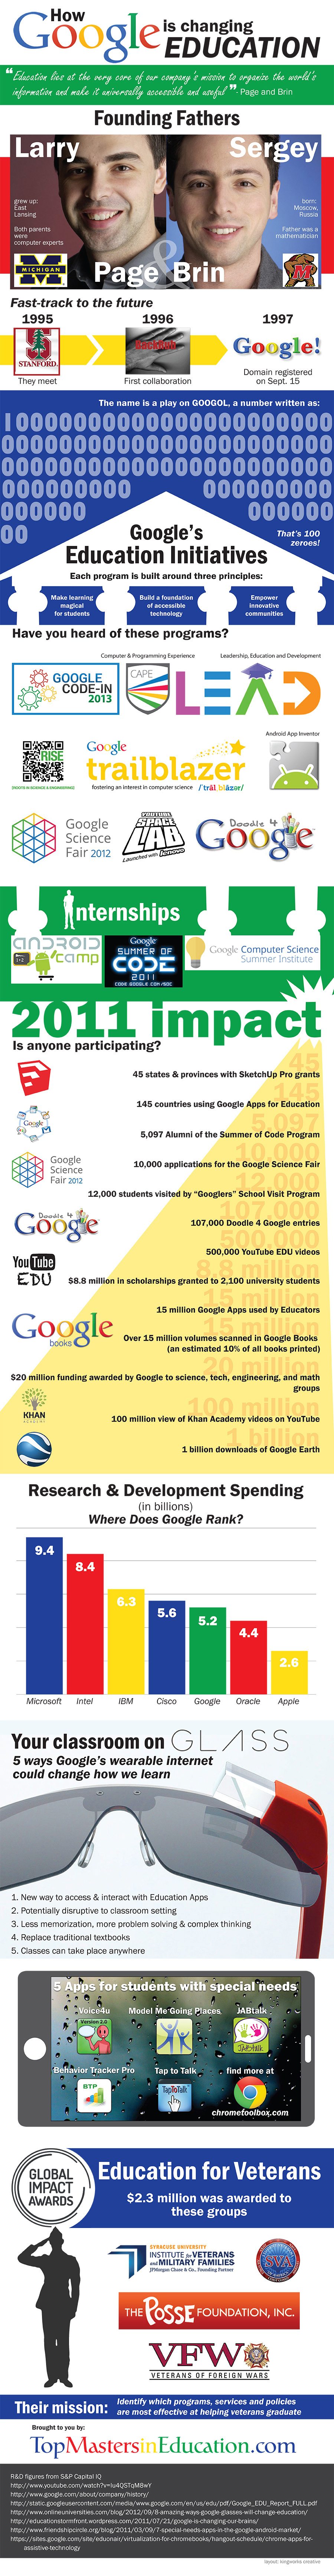 Google and Education